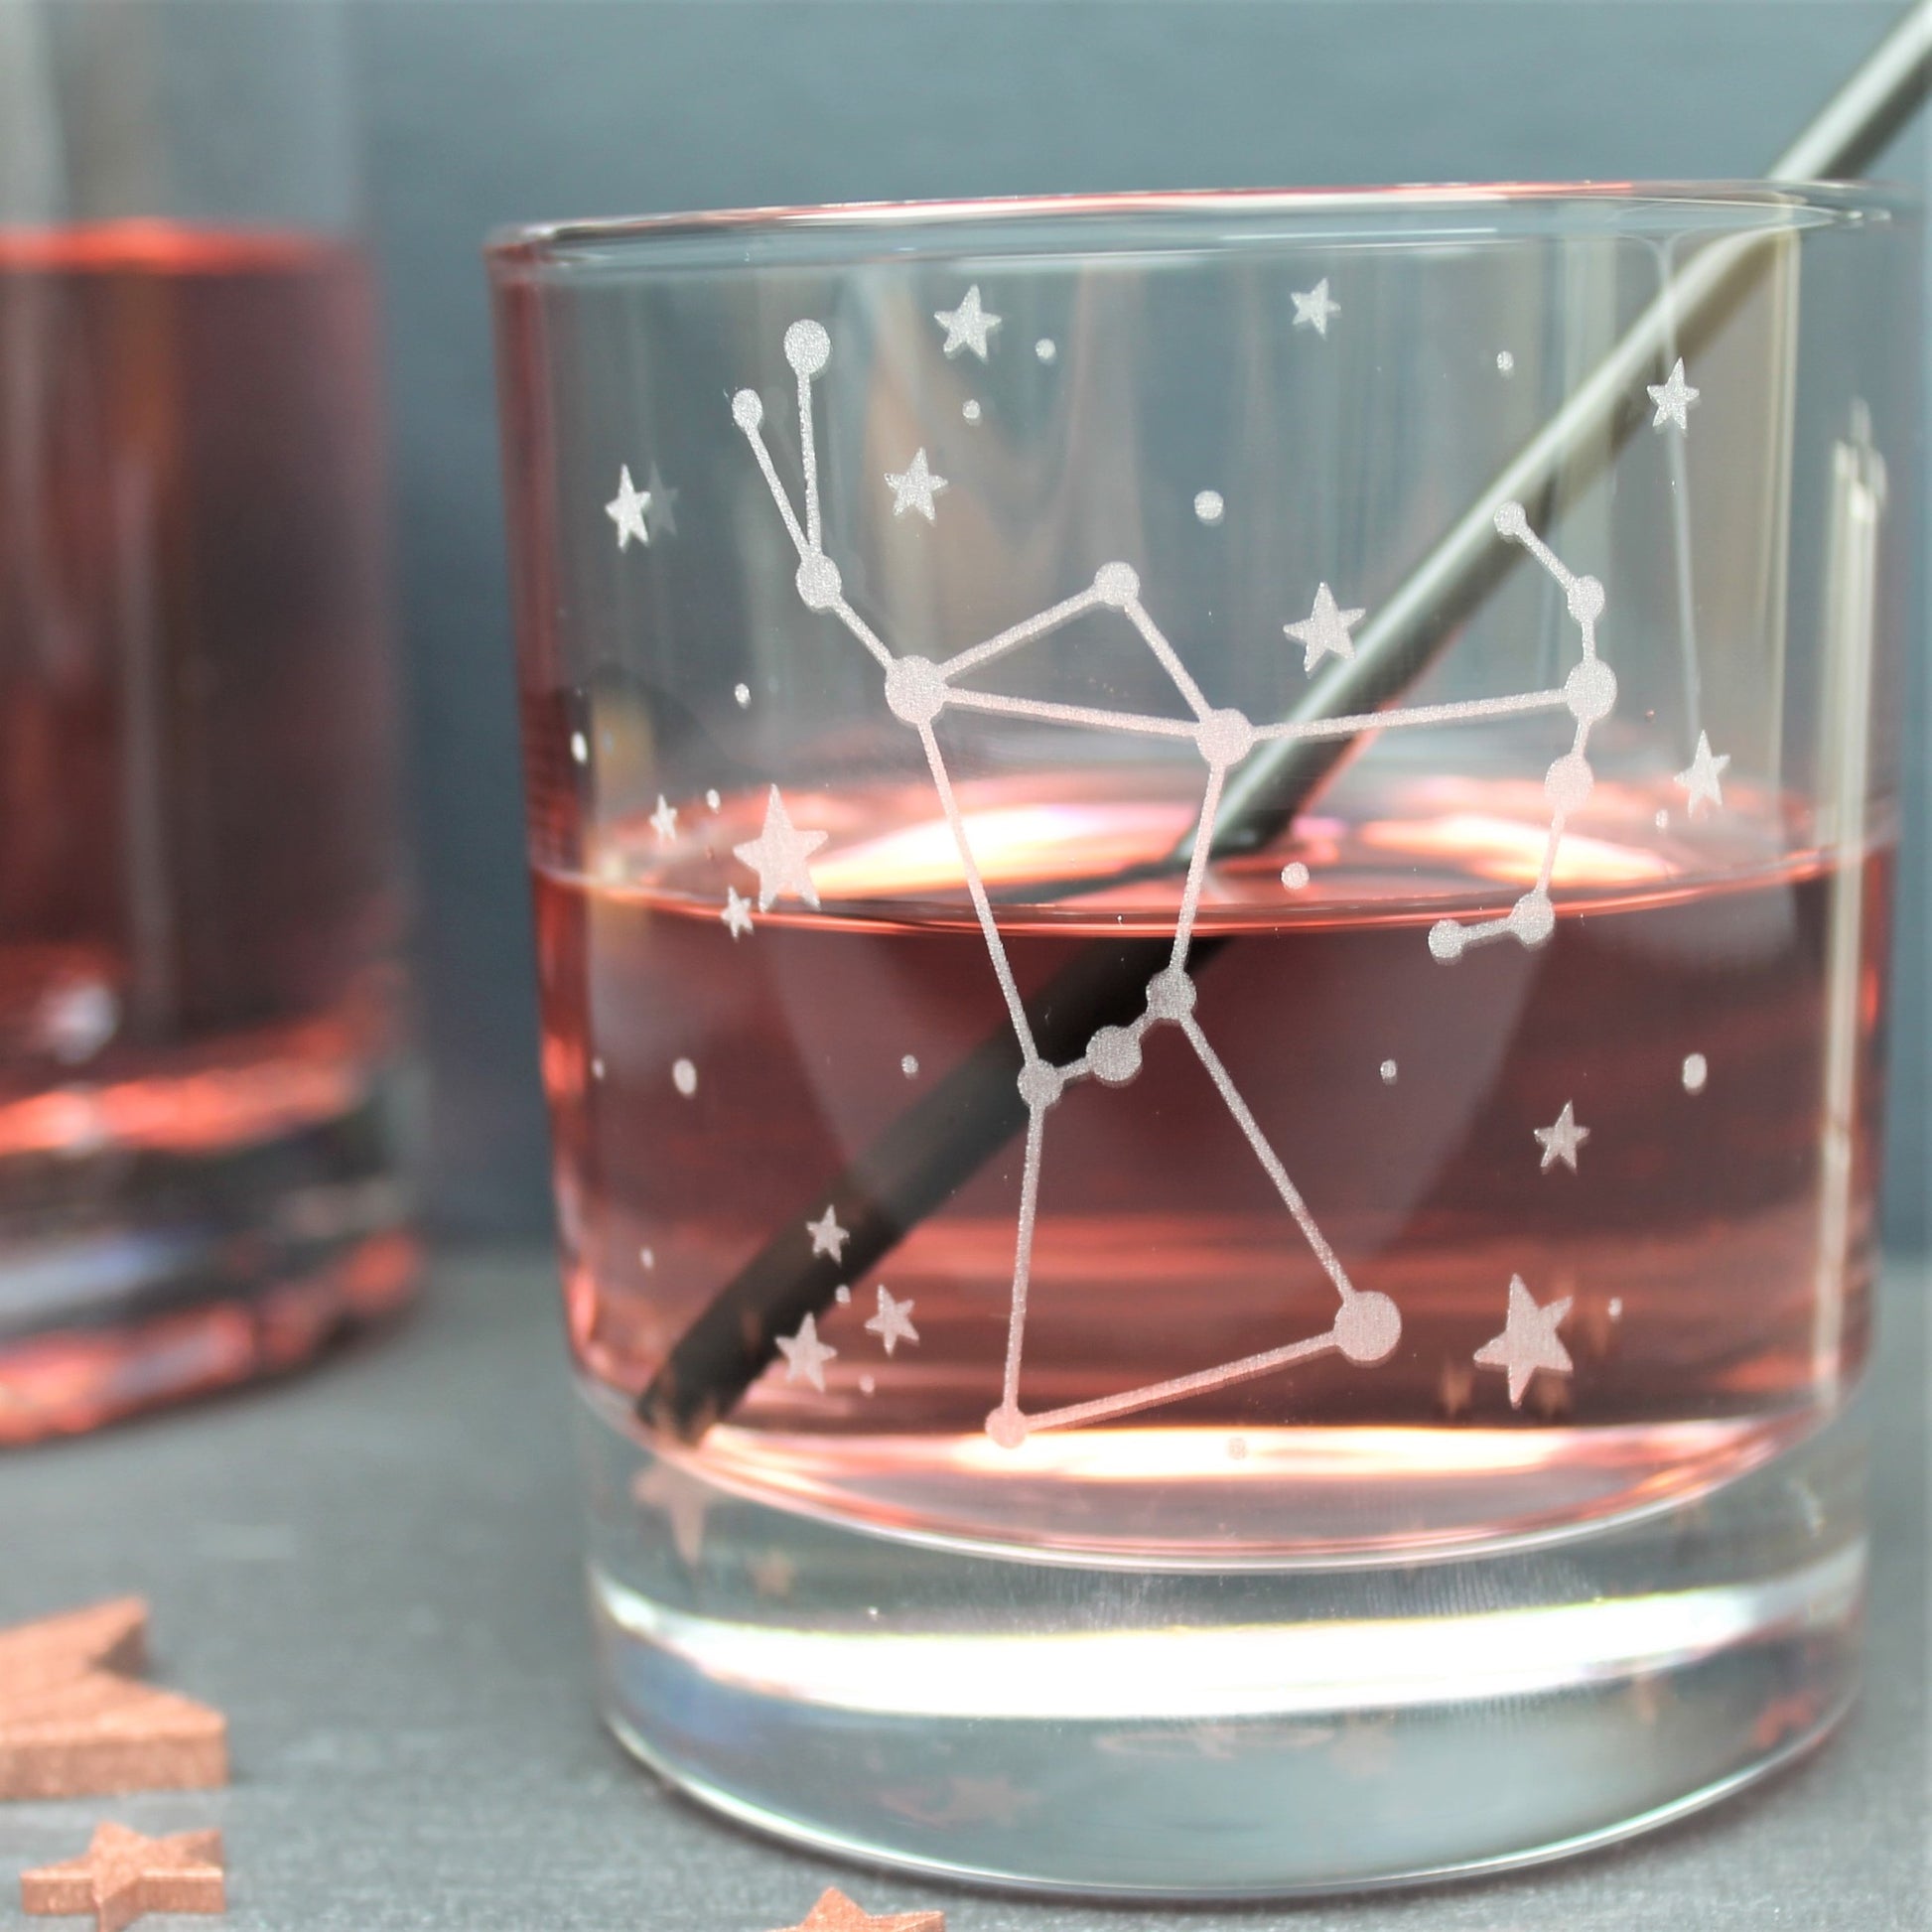 Glass tumbler engraved with the Orion constellation and star design